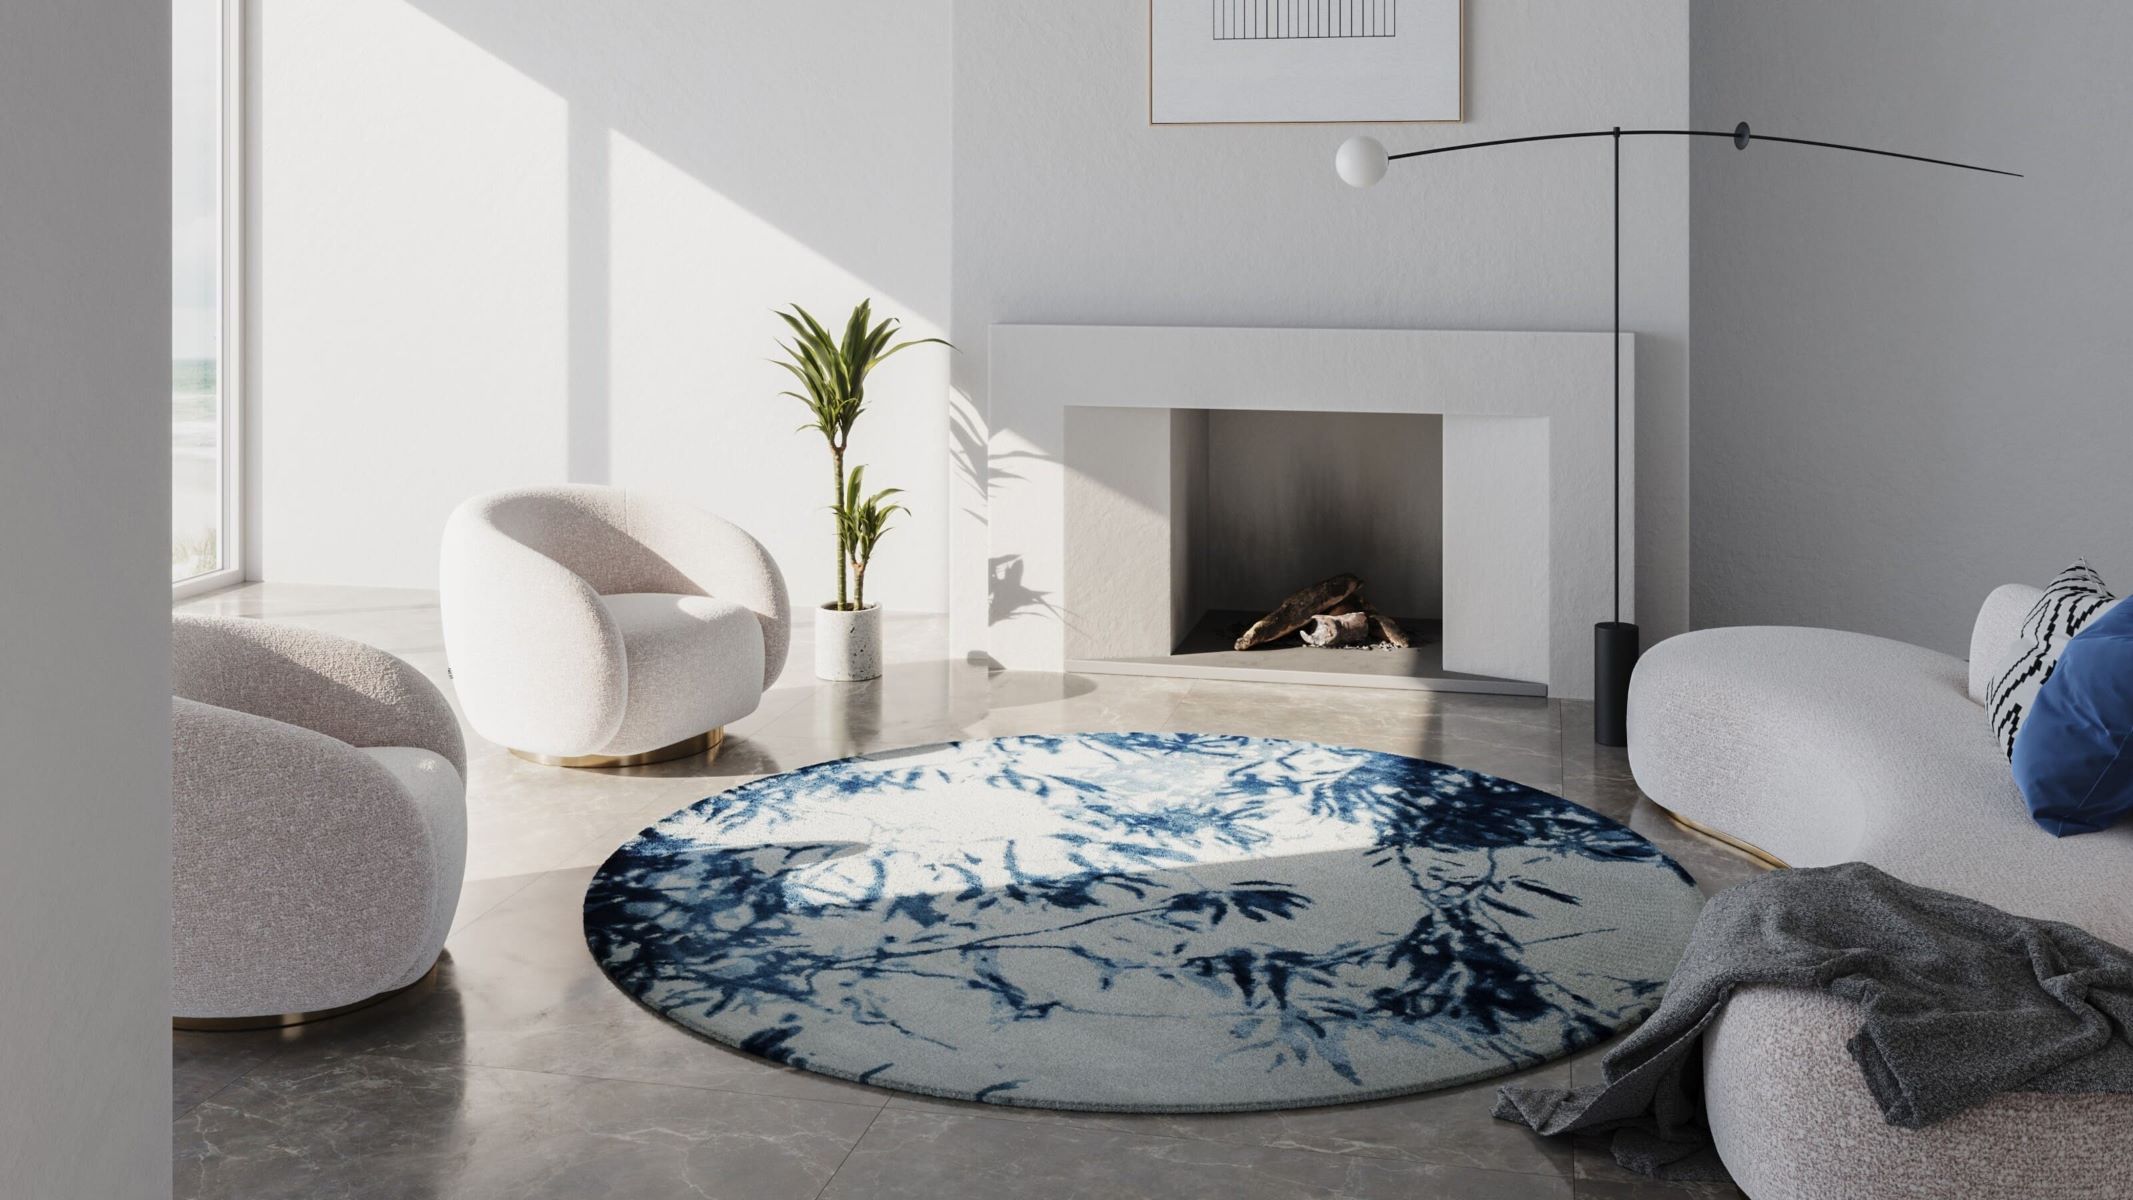 Where To Use Round Rugs